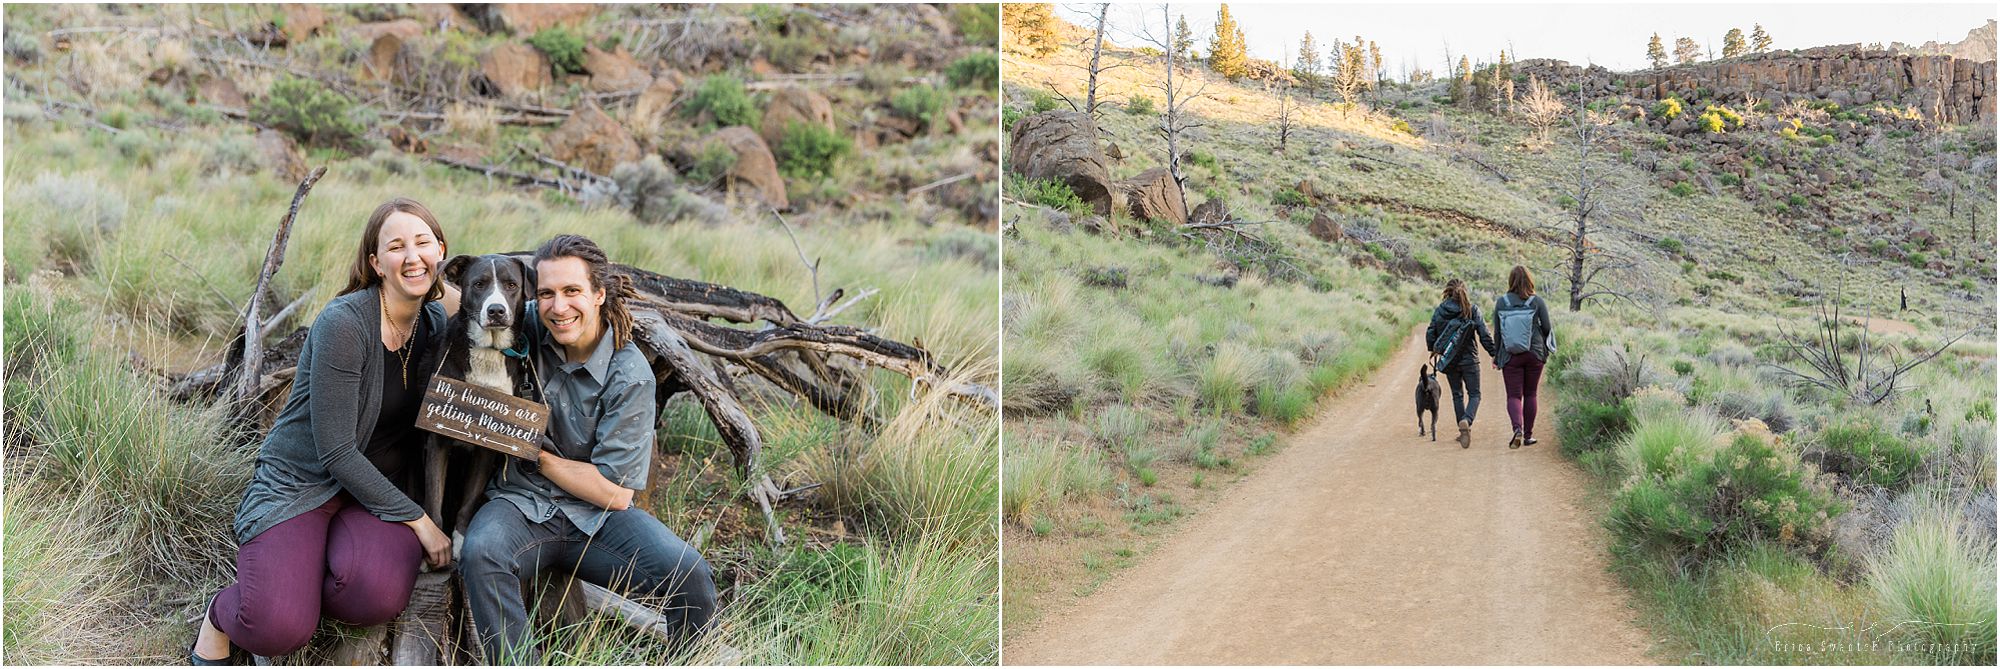 An engagement session at Smith Rock featuring a cute dog by Bend wedding photographer Erica Swantek. 